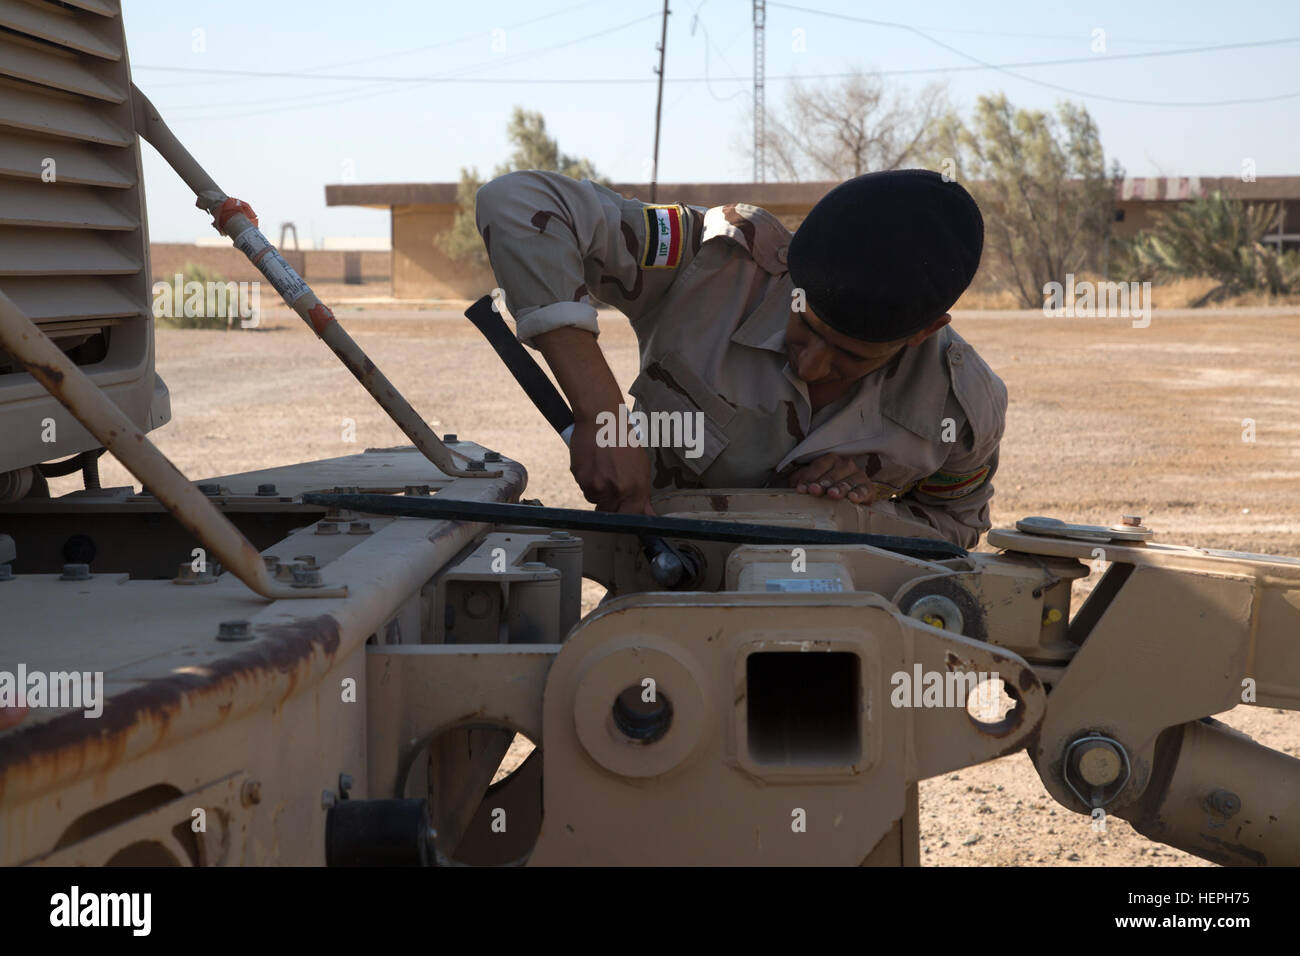 An Iraqi army engineer removes a mine roller during MaxxPro mine-resistant, ambush-protected vehicle training at Camp Taji, Iraq, July 11, 2015. Through advise and assist and build partner capacity missions, the Combined Joint Task Force – Operation Inherent Resolve’s multinational coalition has trained more than 10,000 Iraqi security force personnel to defeat the Islamic State of Iraq and the Levant. (U.S. Army photo by Spc. Paris Maxey/Released) Iraqi Army Soldiers train on mine sweeping and vehicle maintenance 150711-A-XM842-048 Stock Photo